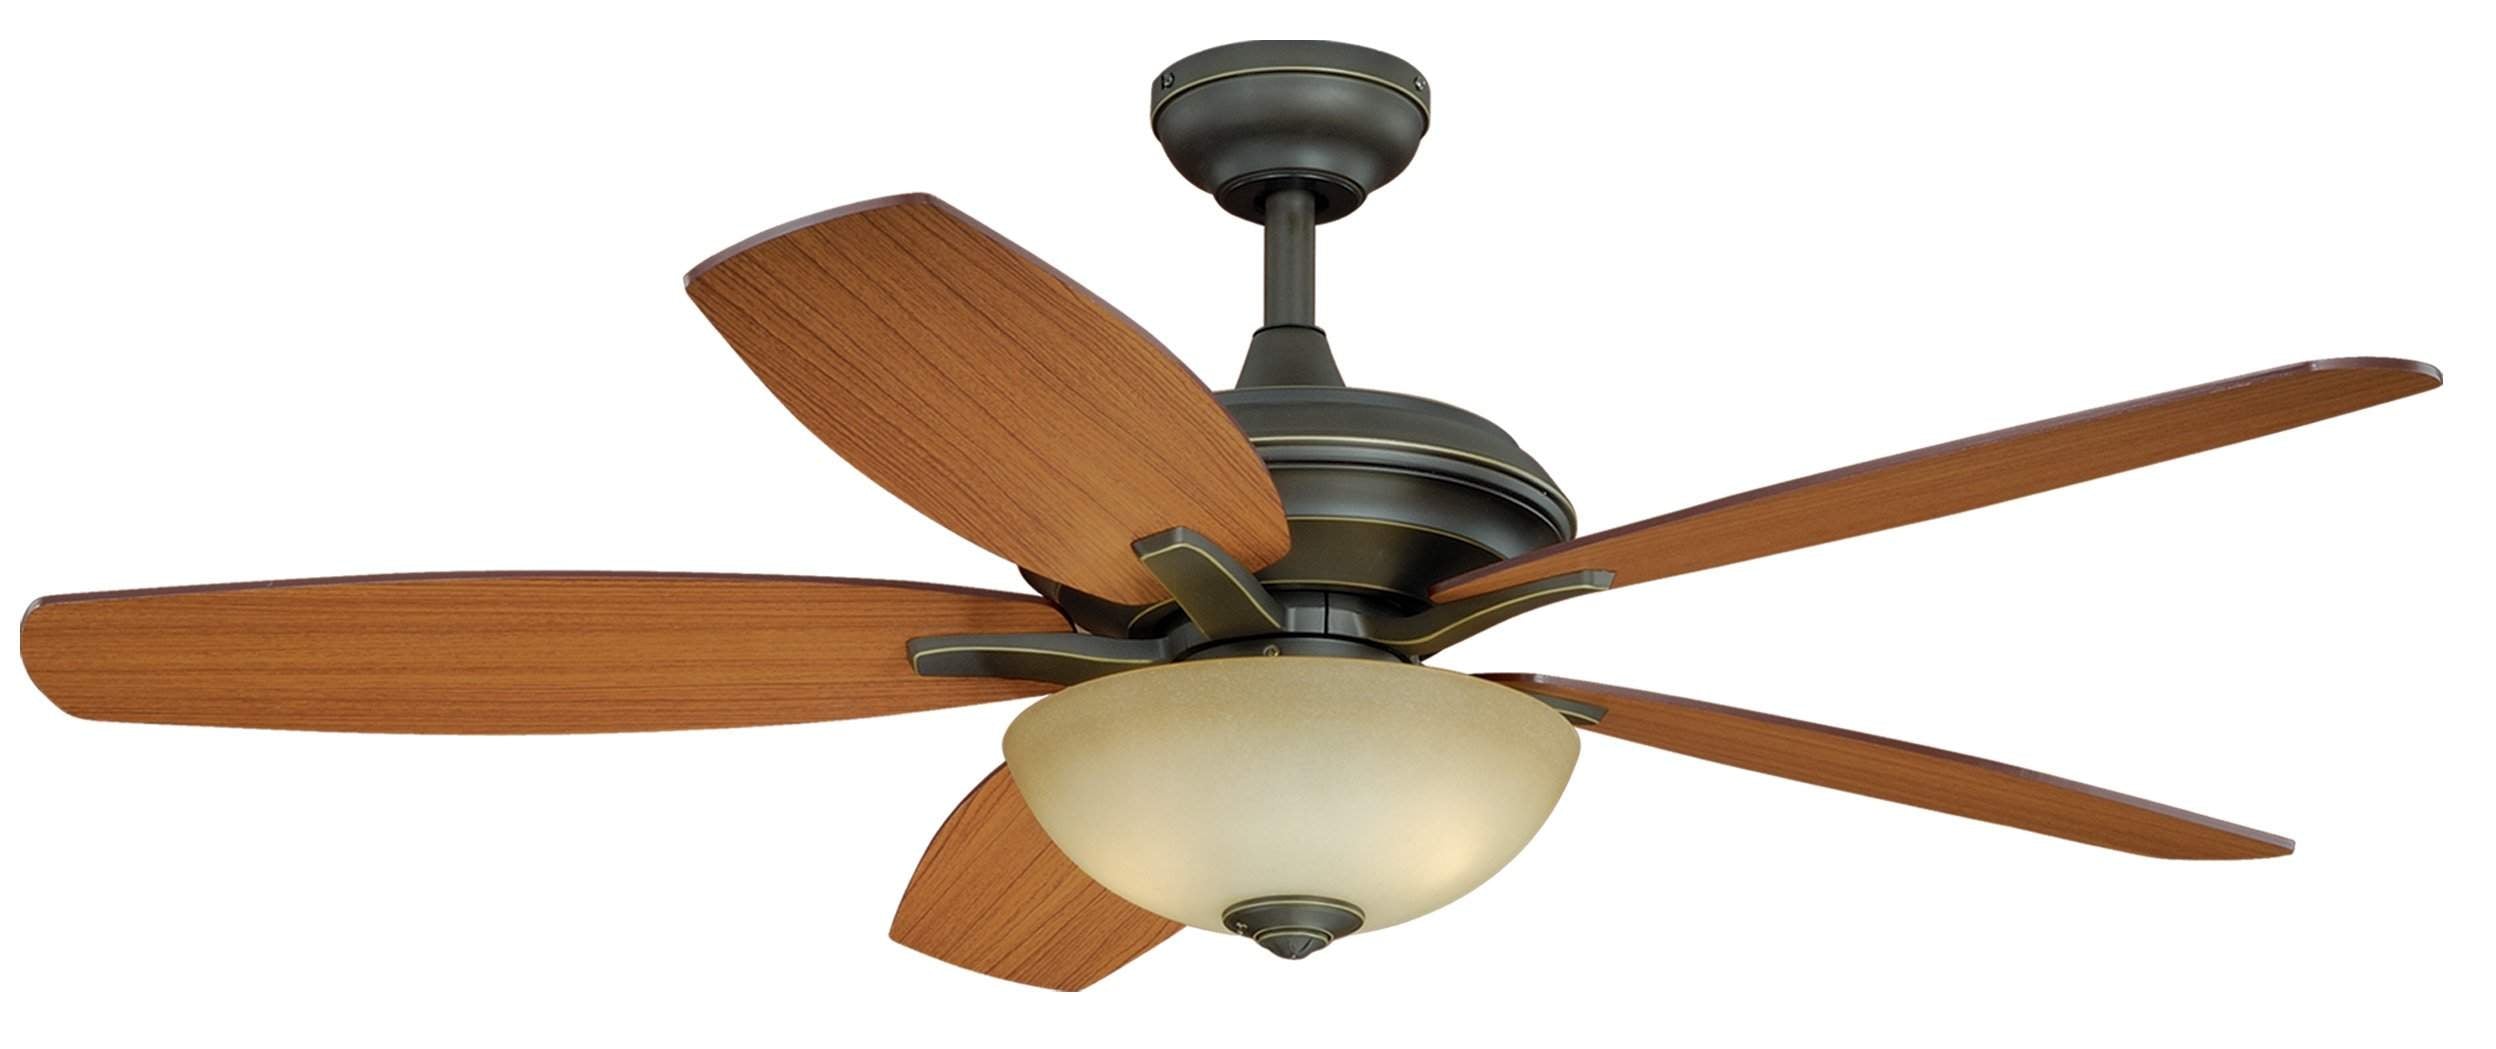 Vaxcel The Vaxcel Valencia 52" Ceiling Fan in Vintage Bronze Finish FN52998OR